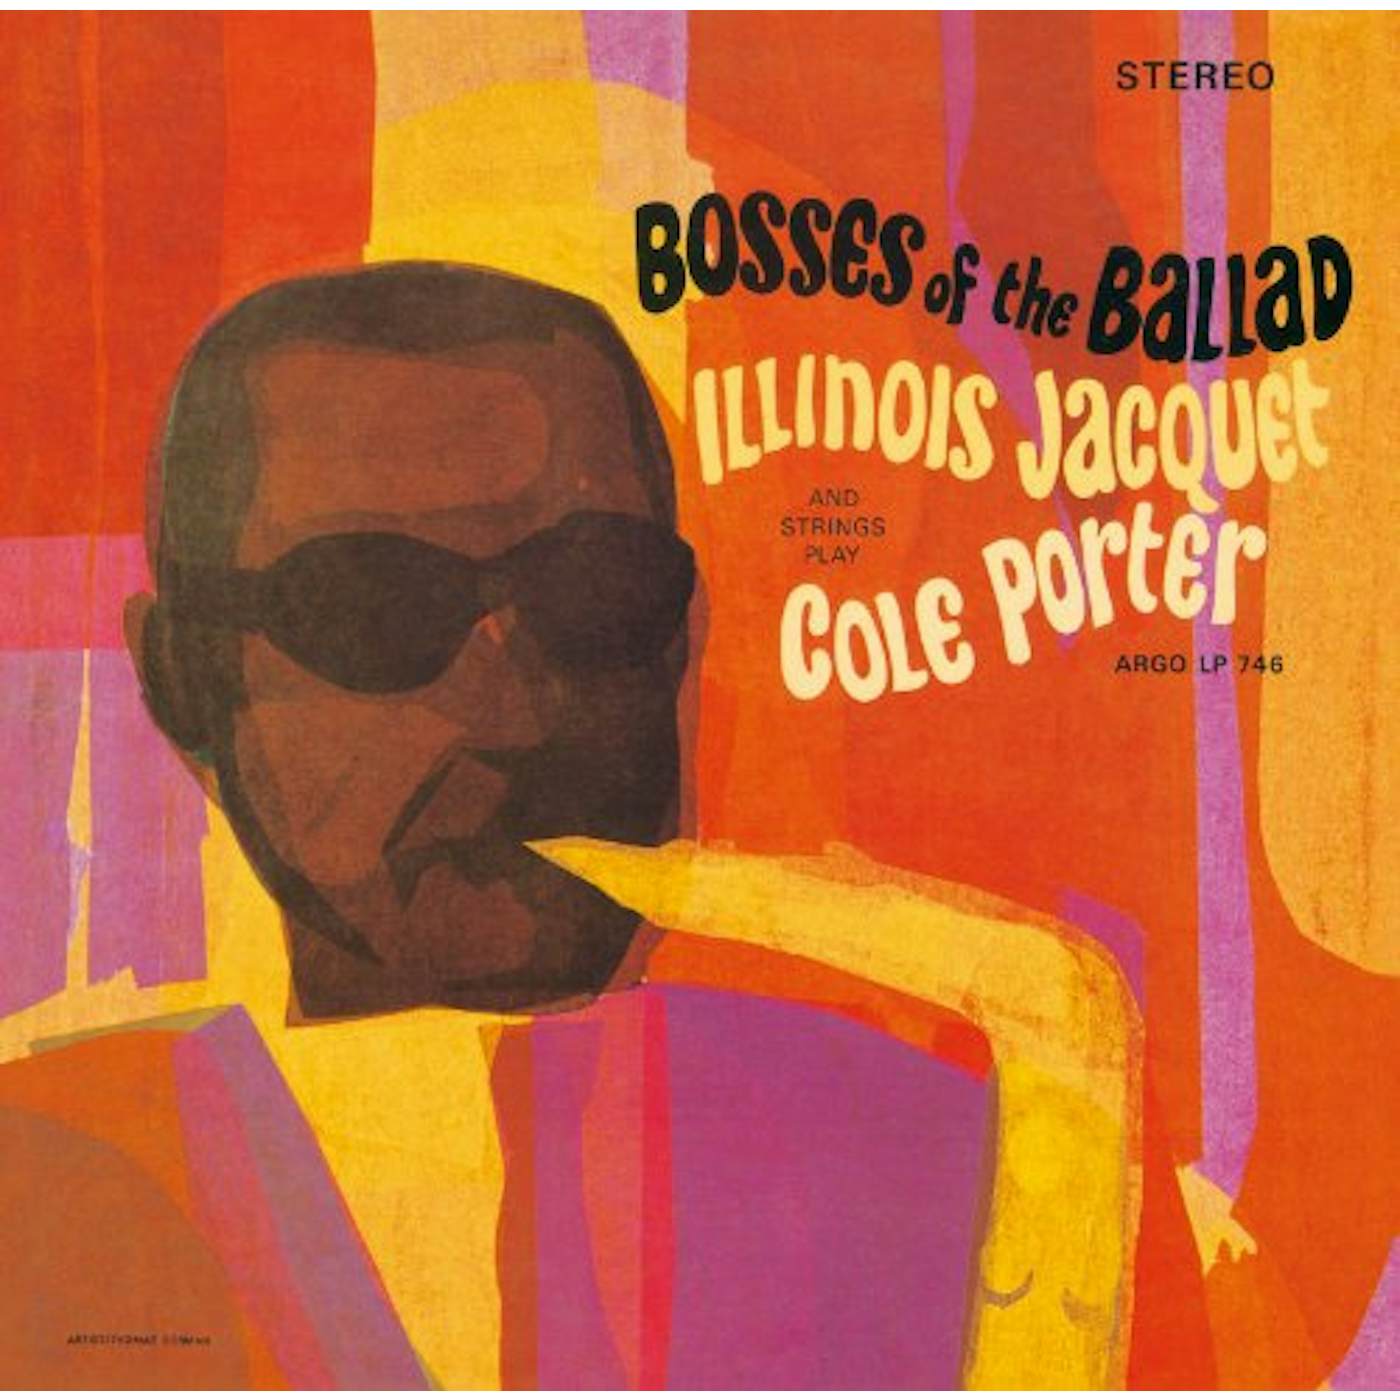 BOSS OF THE BALLAD: ILLINOIS JACQUET PLAYS COLE CD